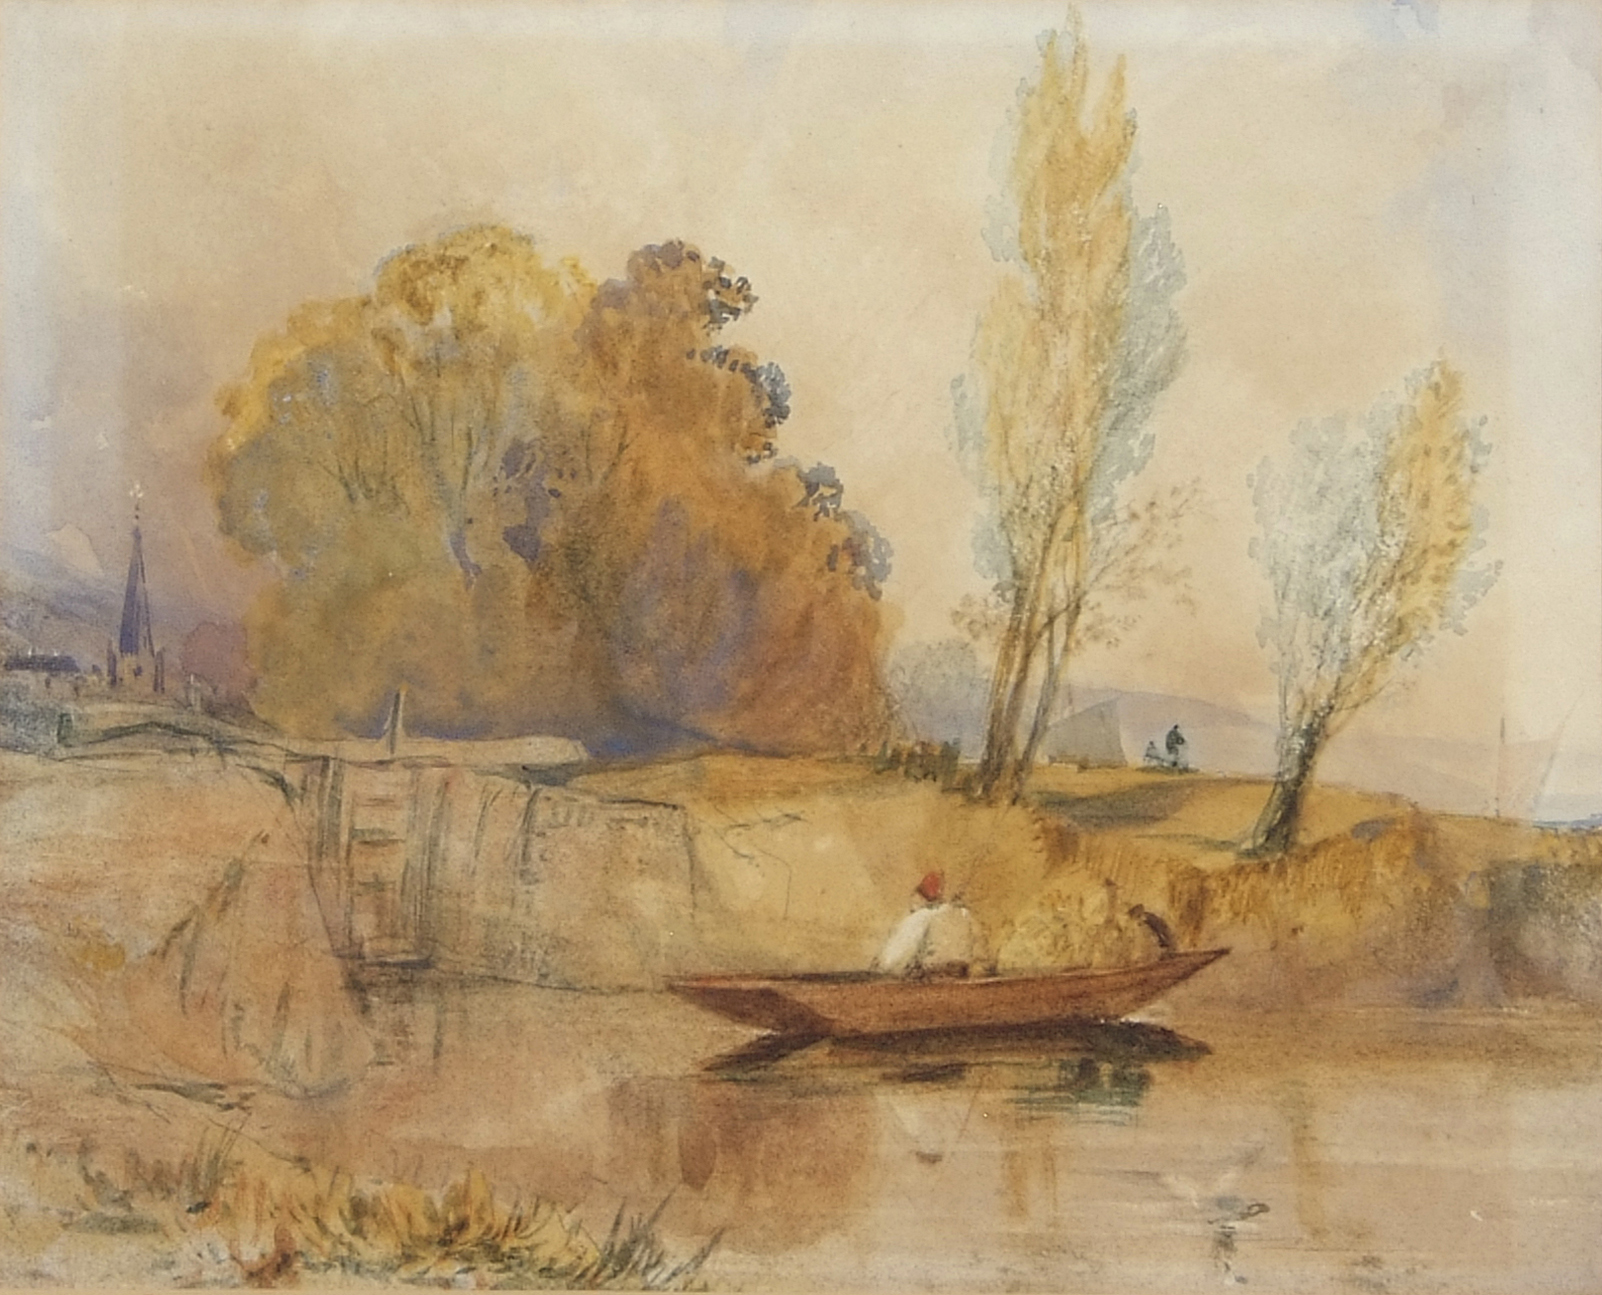 Alfred Priest (1810-1850), Figure in a punt before a lock, watercolour, 20 x 25cm. Provenance: